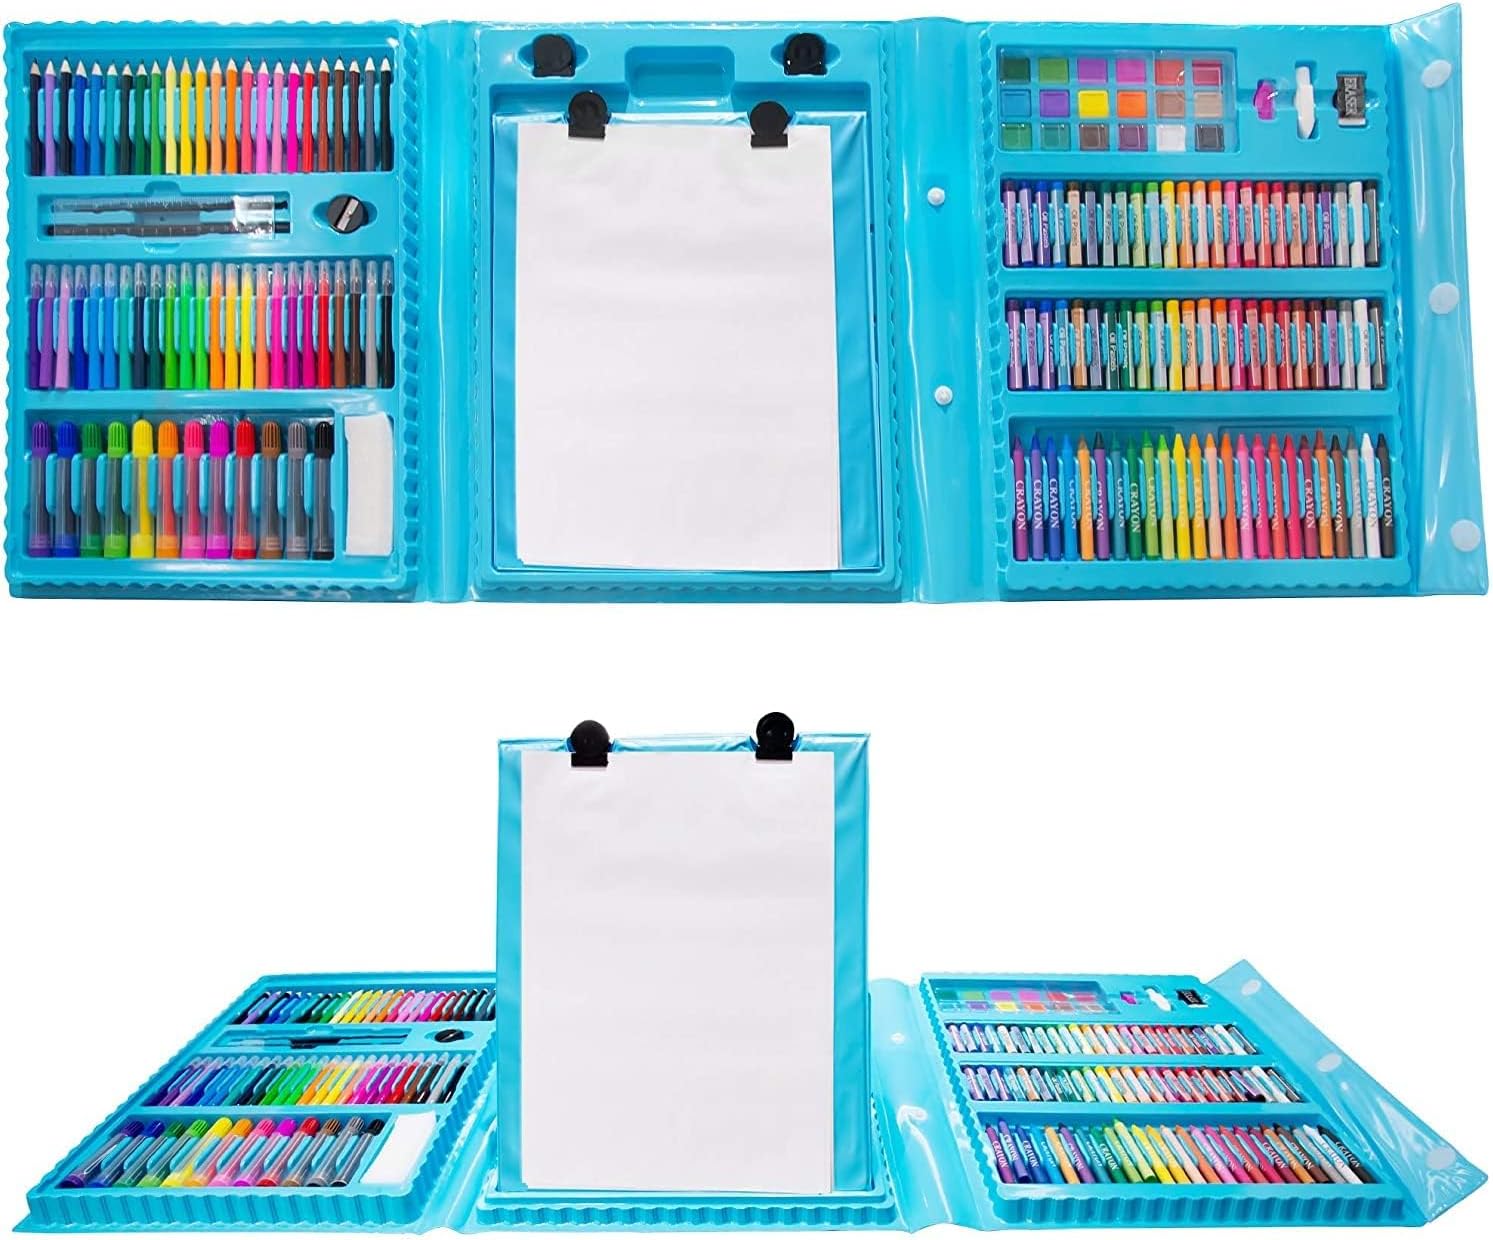 208 Pieces Double Sided Trifold Easel Art Set Portable Art Supplies Drawing Set Box With Oil Pastels Crayons Colored Pencils Markers Paint Brush Sketch Pad For Kids Gift (Blue)